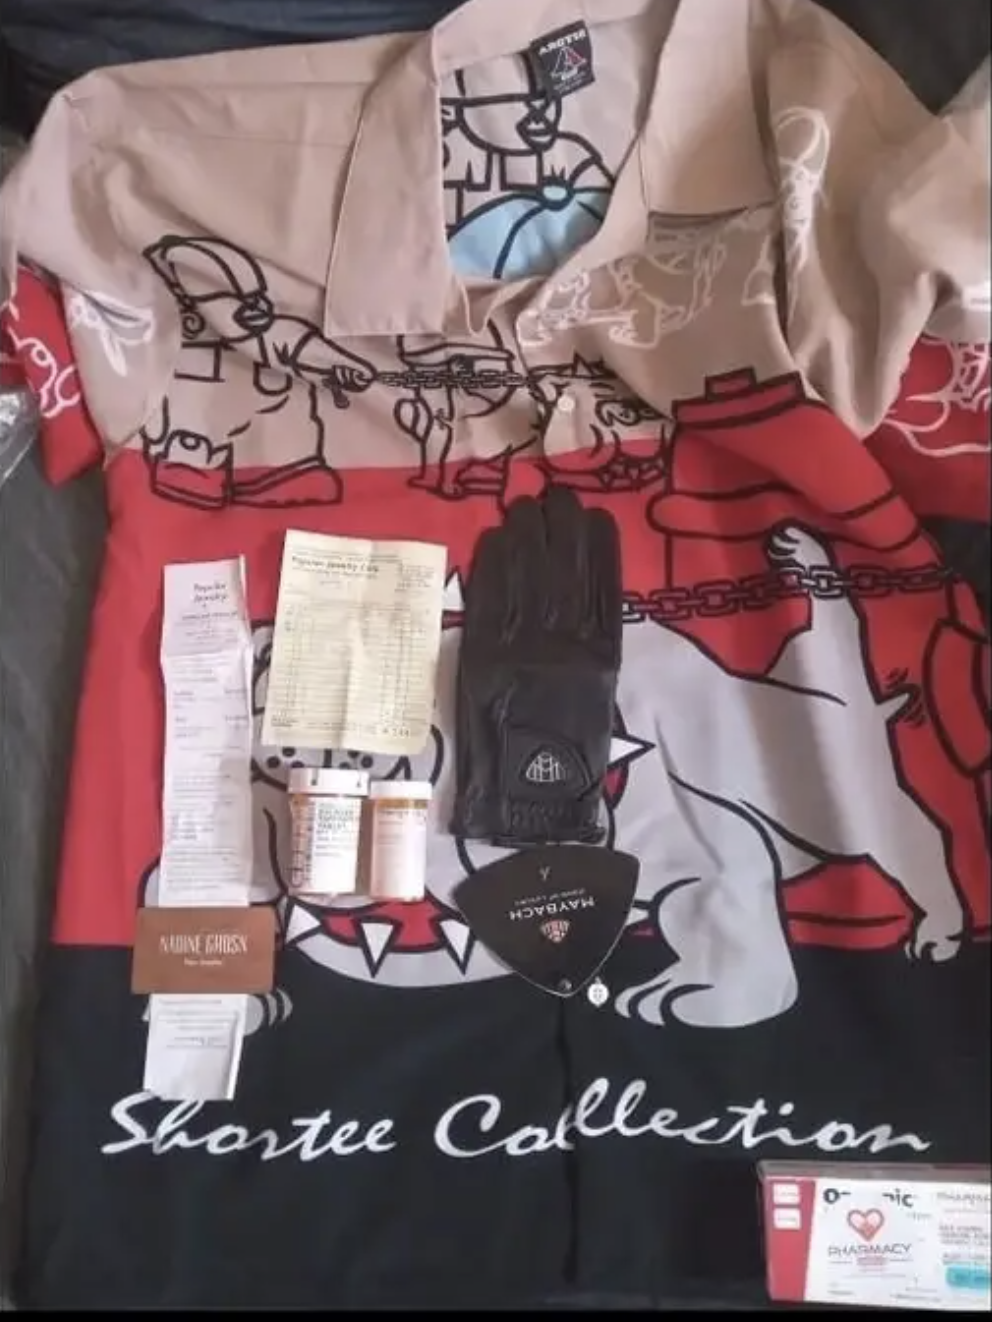 Items from the &quot;Shortee Collection&quot; including a patterned shirt, black glove, two prescription bottles, a receipt, a note, and a product tag